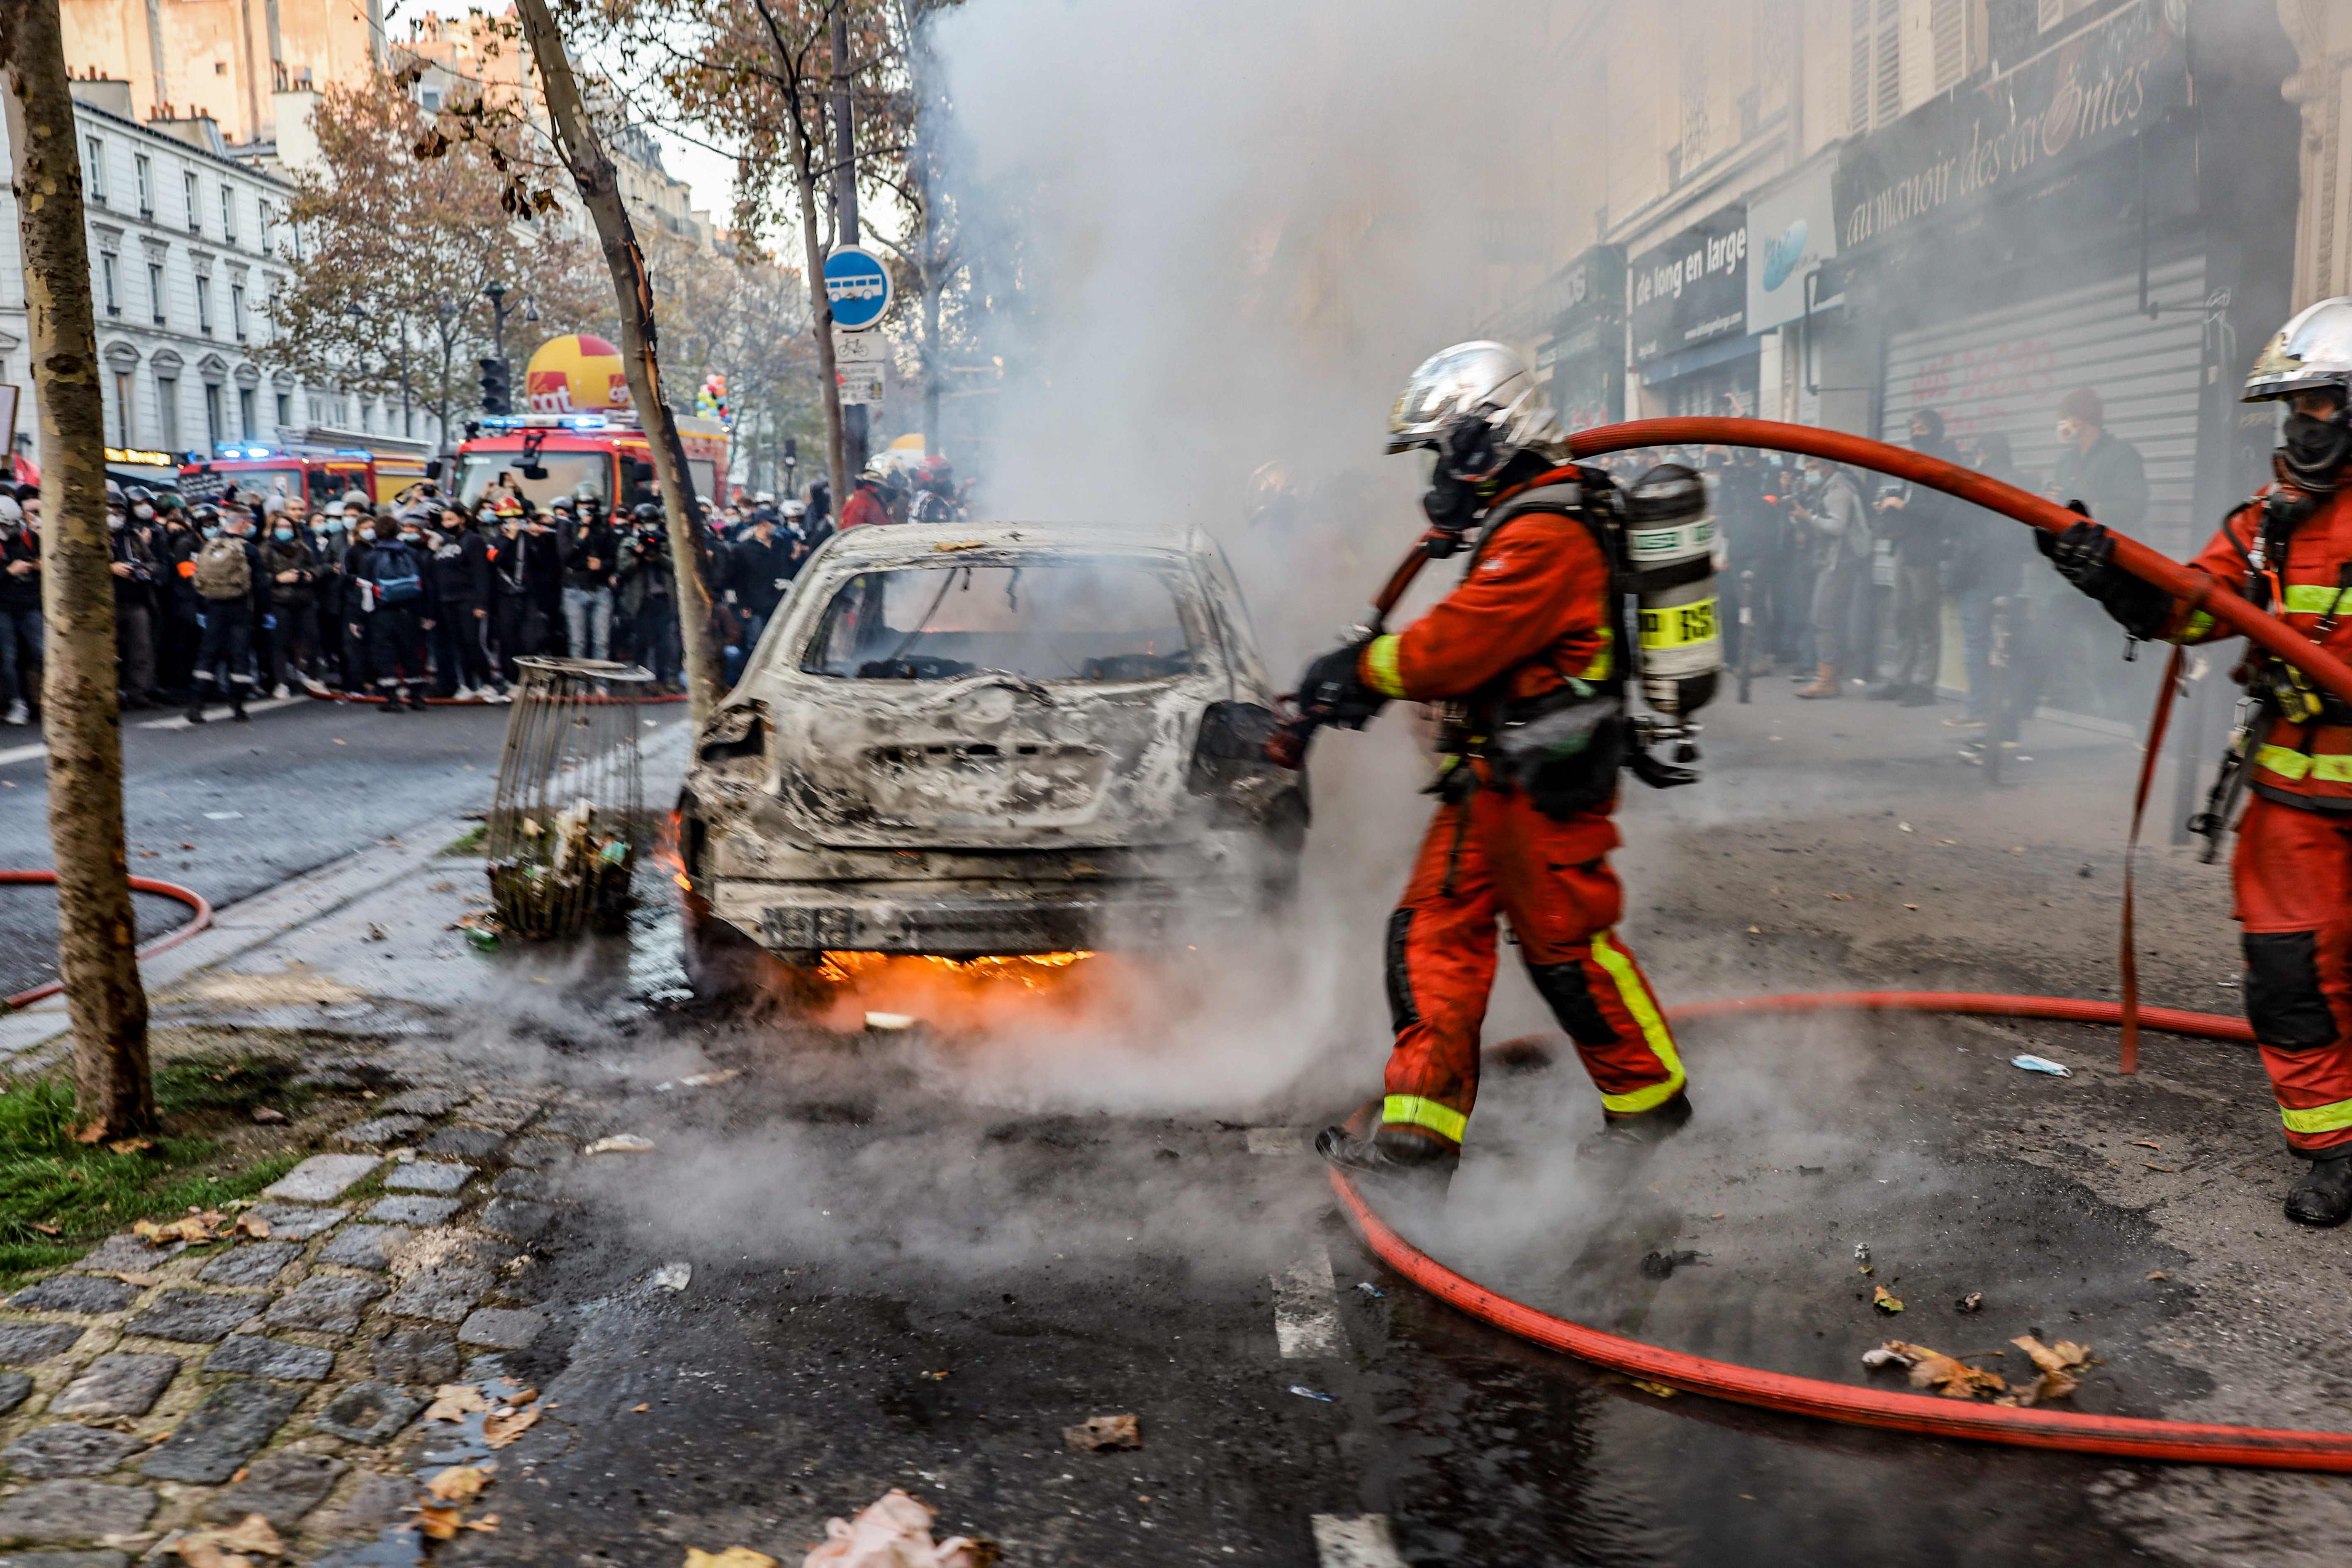 The aftermath of demonstrations in Paris over the weekend